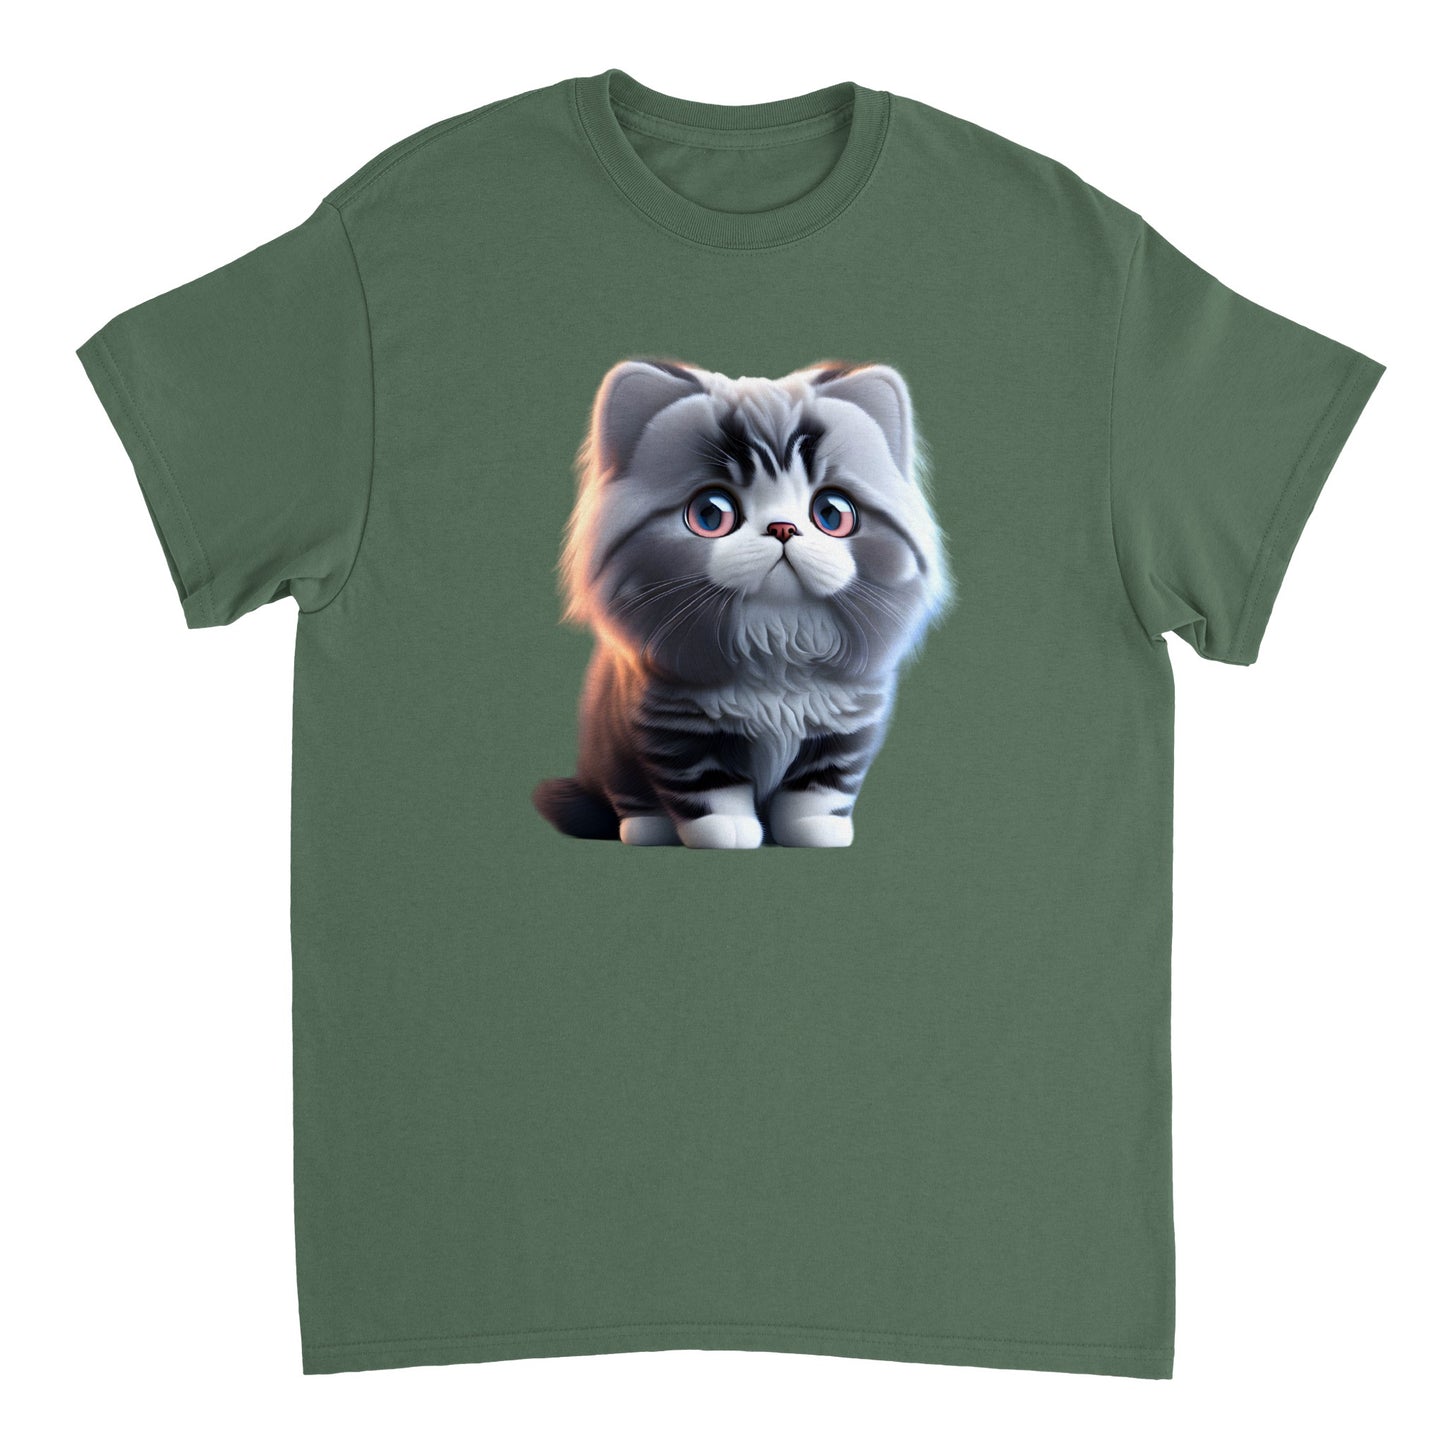 Adorable, Cool, Cute Cats and Kittens Toy - Heavyweight Unisex Crewneck T-shirt 15